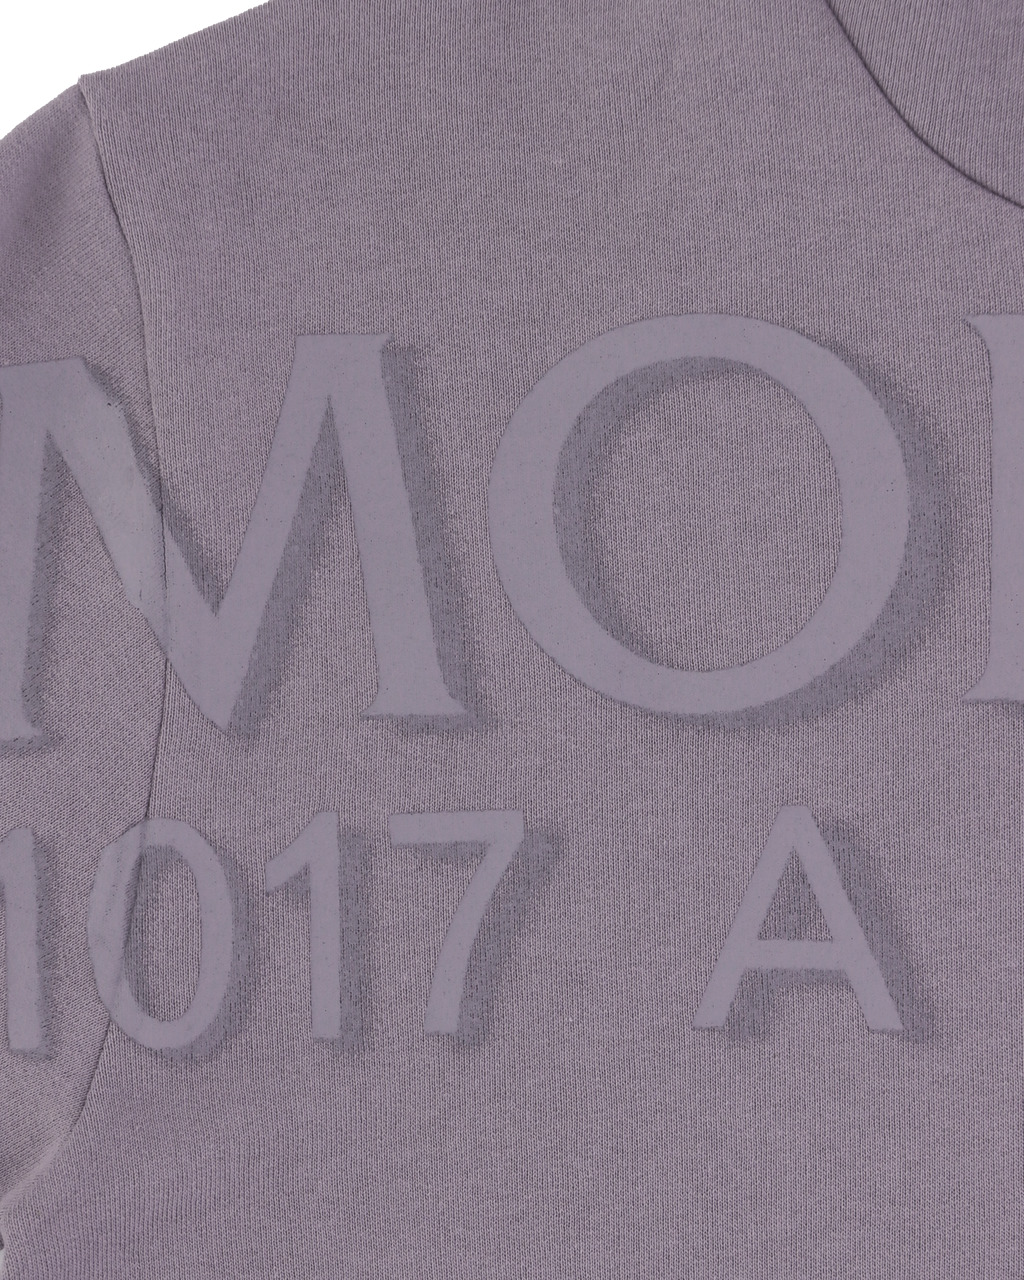 6 MONCLER 1017 ALYX 9SM HOODIE SWEATER - 6